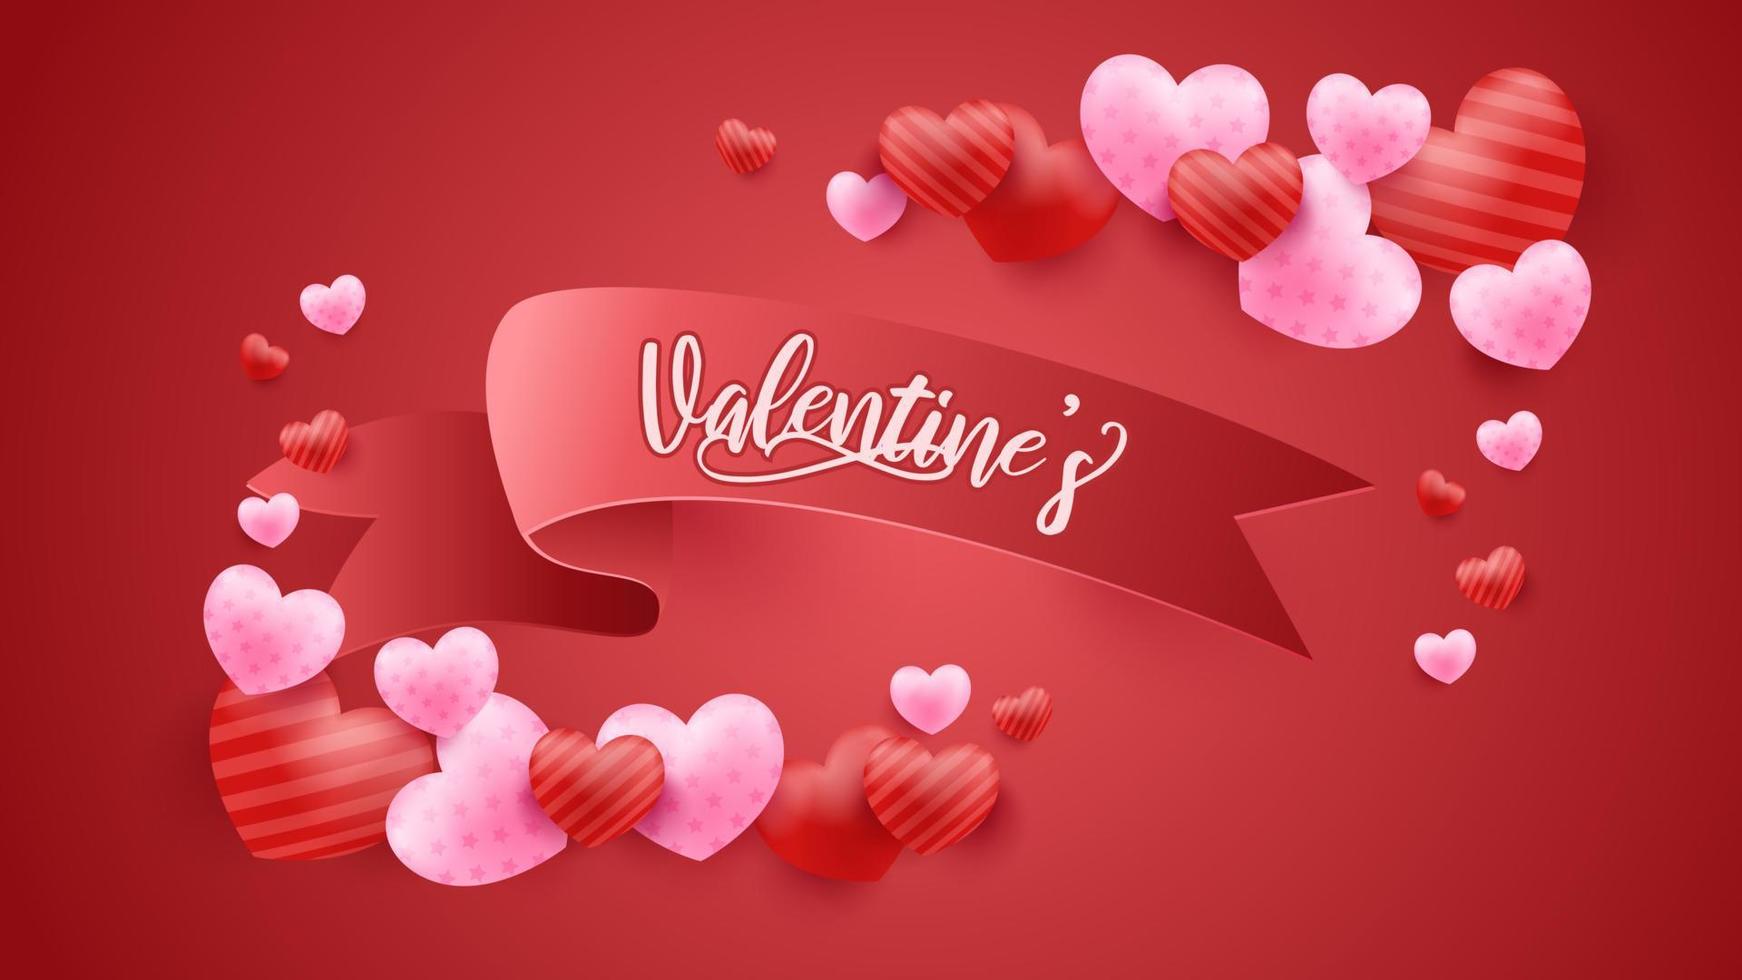 Red Valentine's Day background with 3d hearts. Vector illustration. Cute love banner or greeting card.